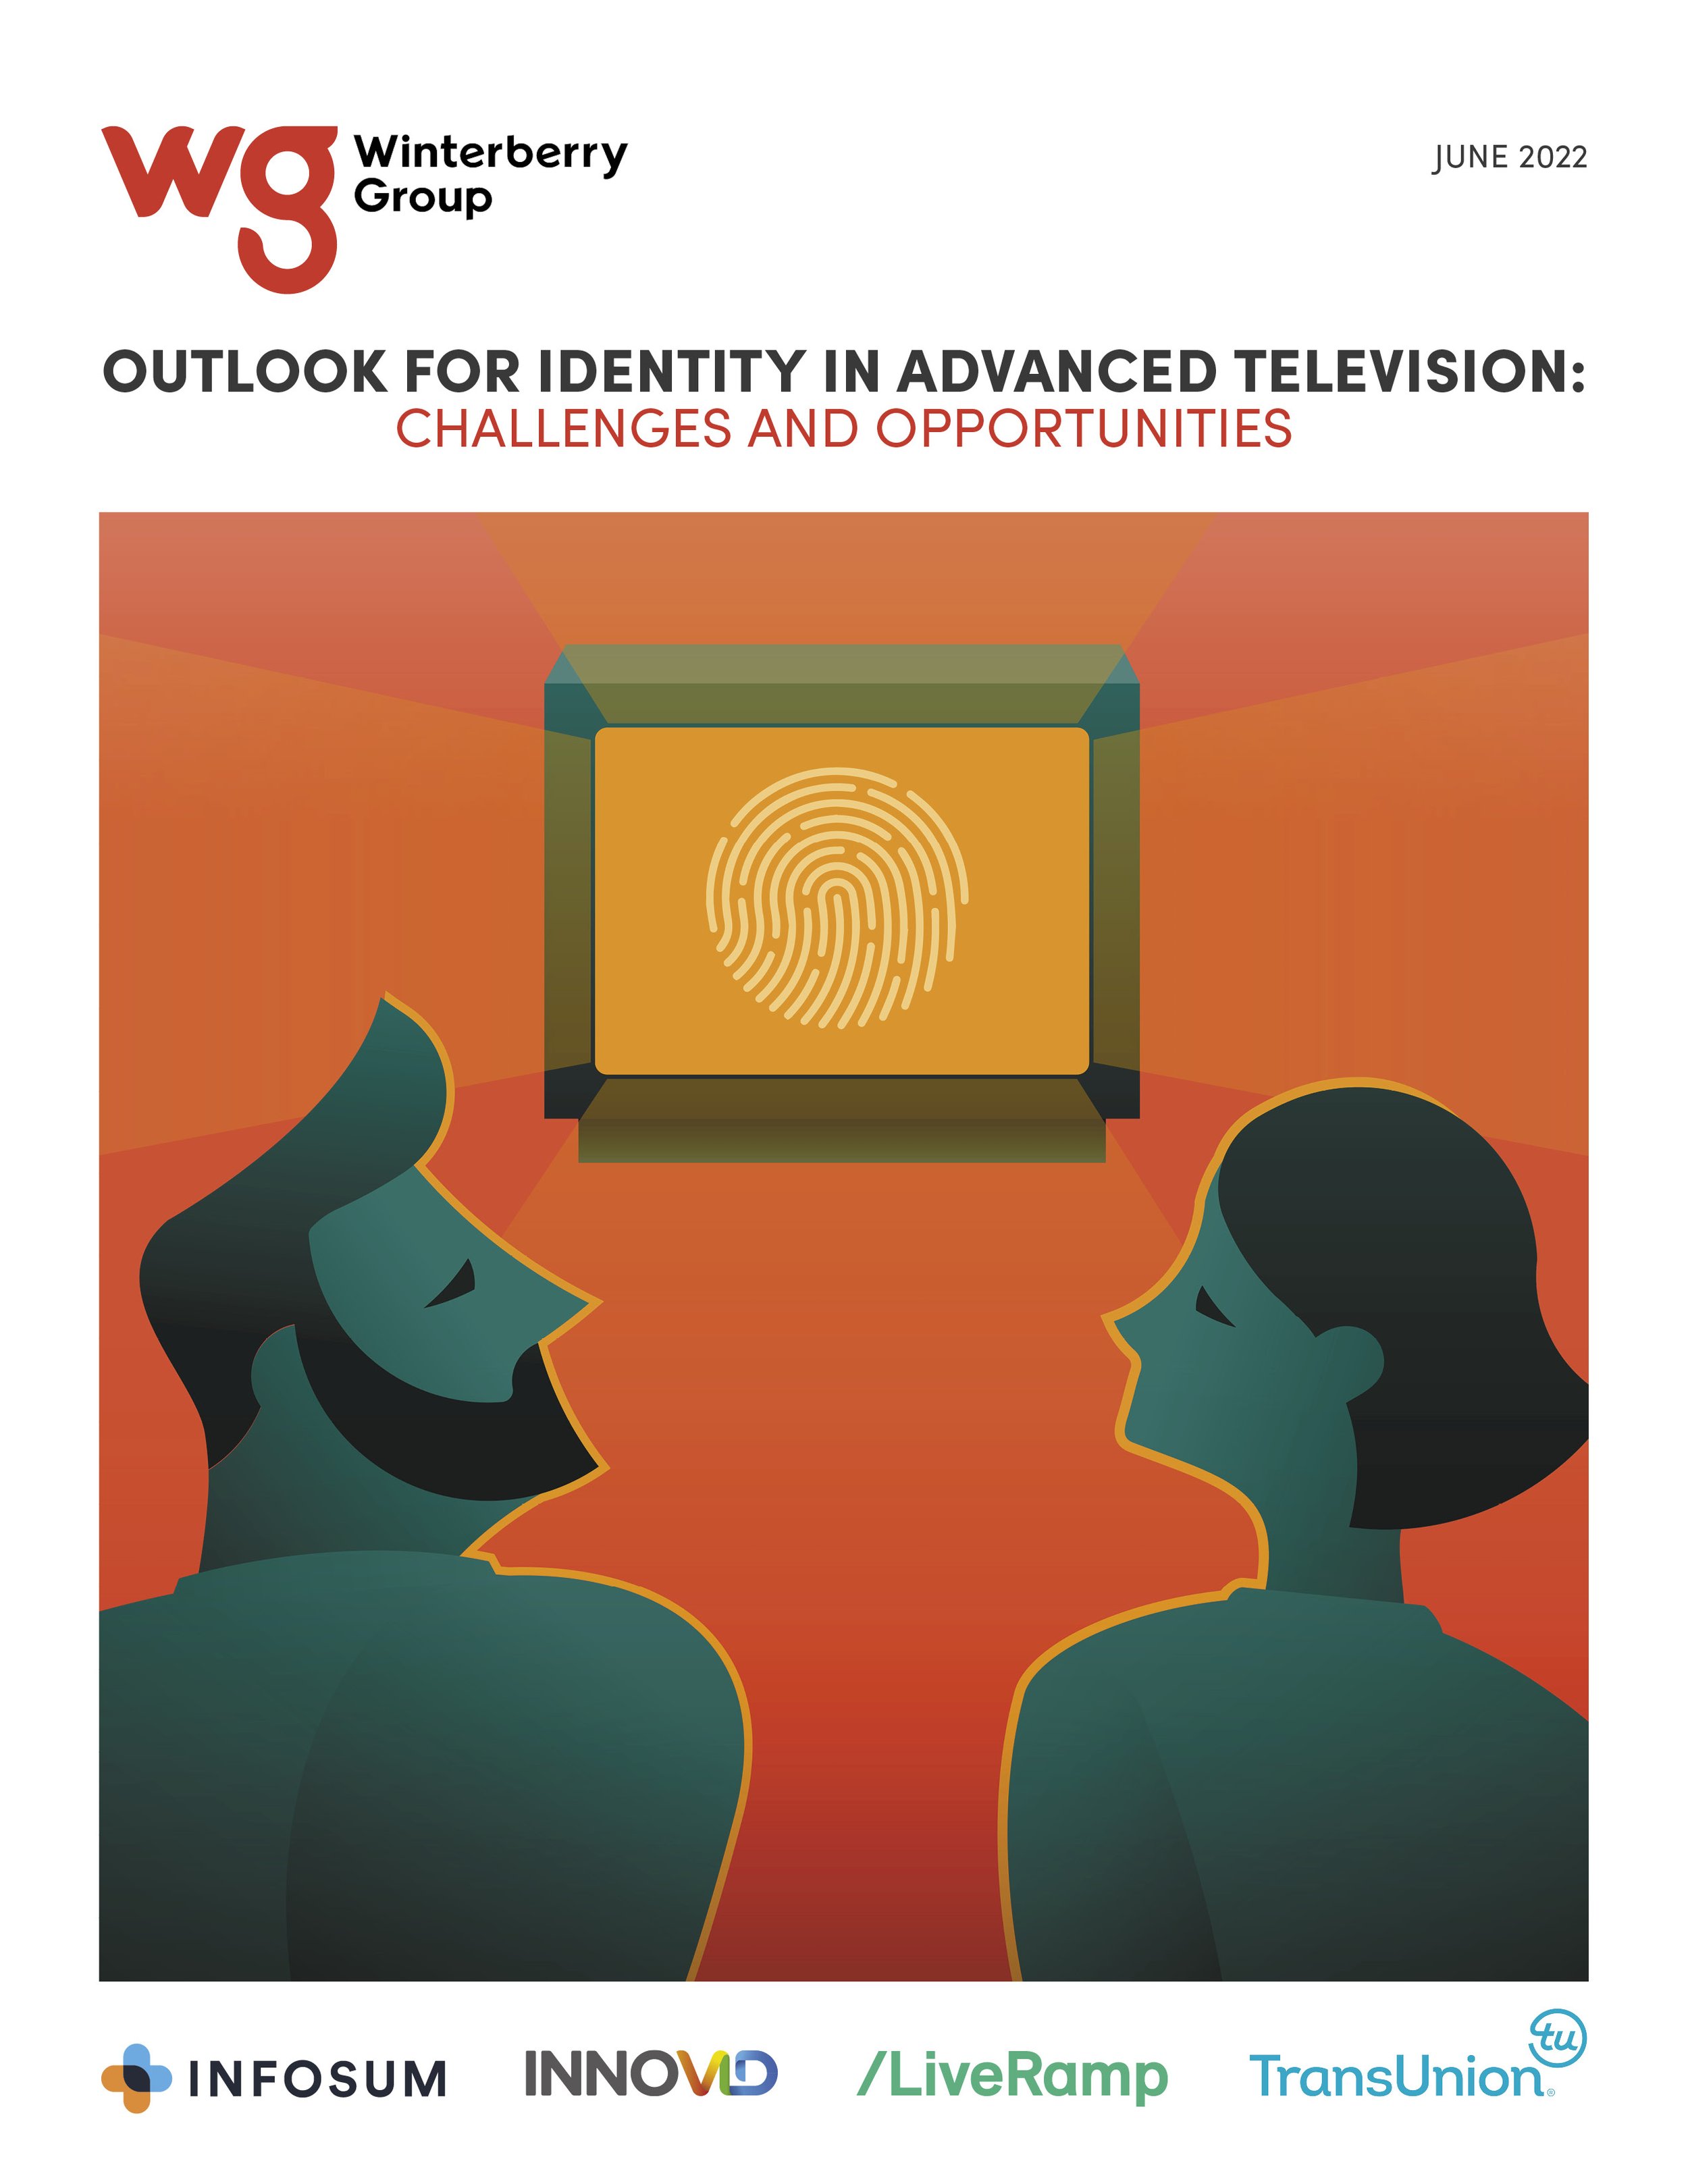 The Outlook for Identity in Advanced Television: Challenges and Opportunities